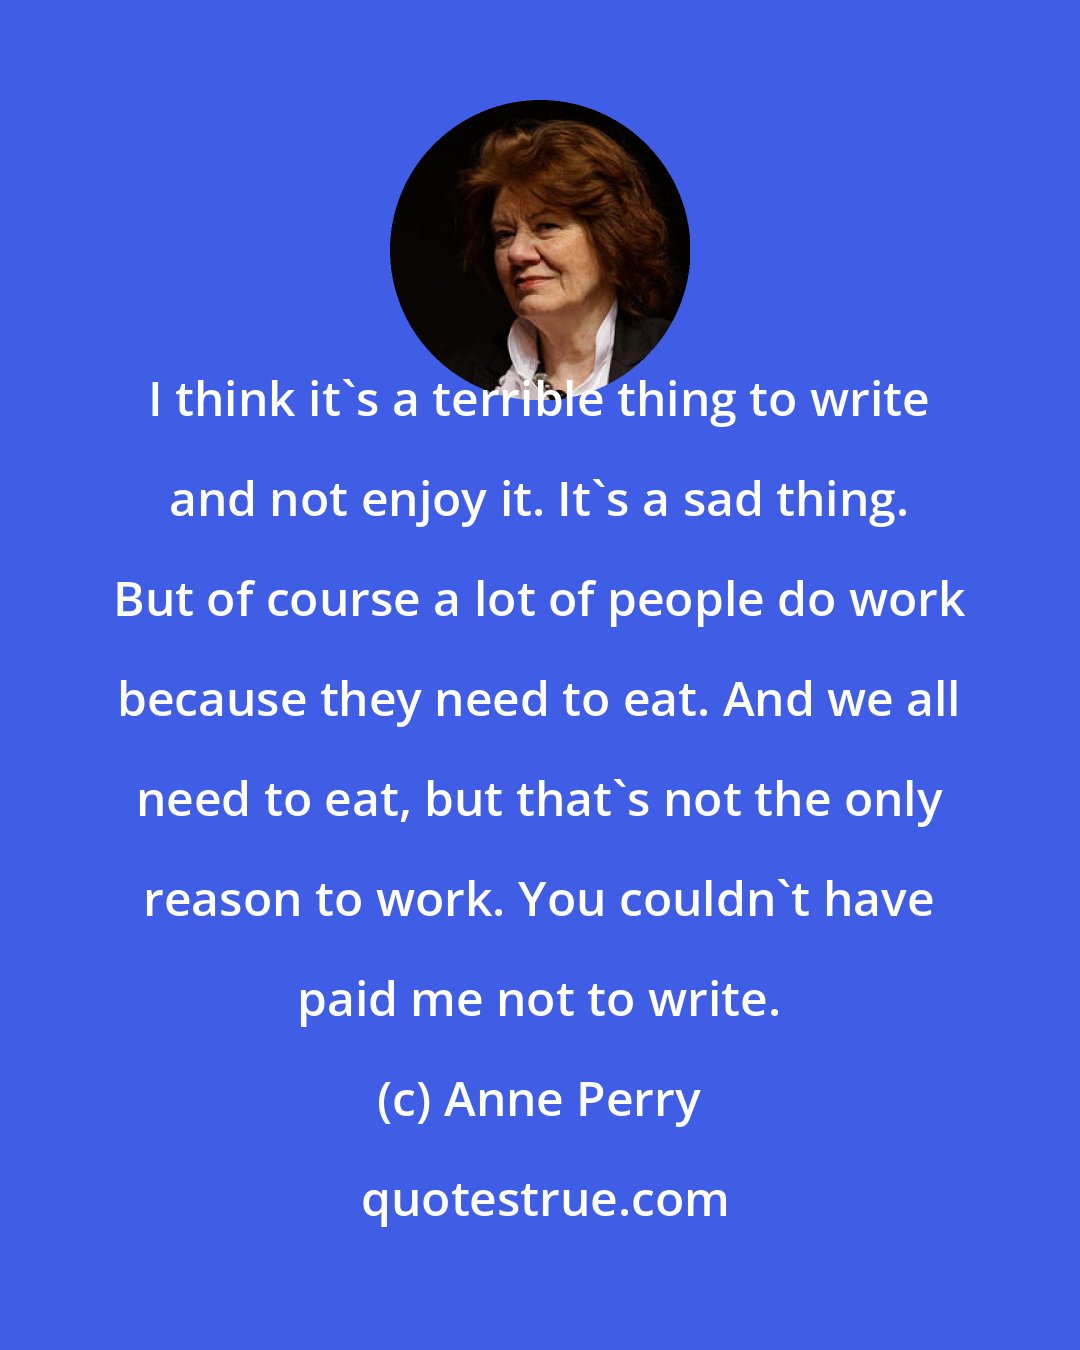 Anne Perry: I think it's a terrible thing to write and not enjoy it. It's a sad thing. But of course a lot of people do work because they need to eat. And we all need to eat, but that's not the only reason to work. You couldn't have paid me not to write.